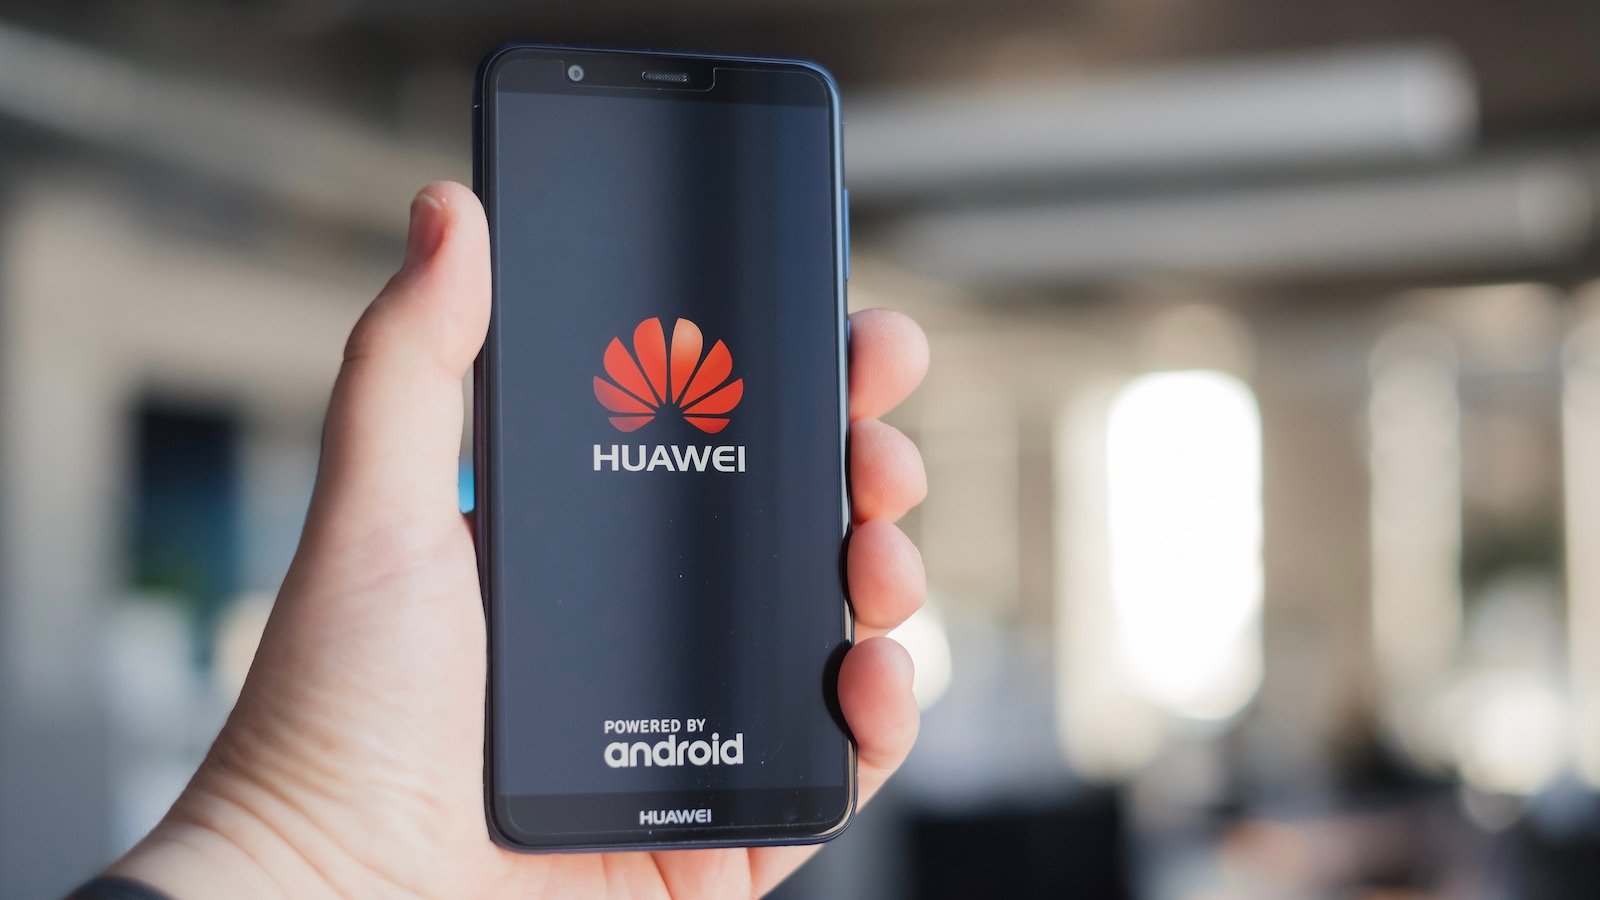 Huawei To Launch First 5G Phone in September